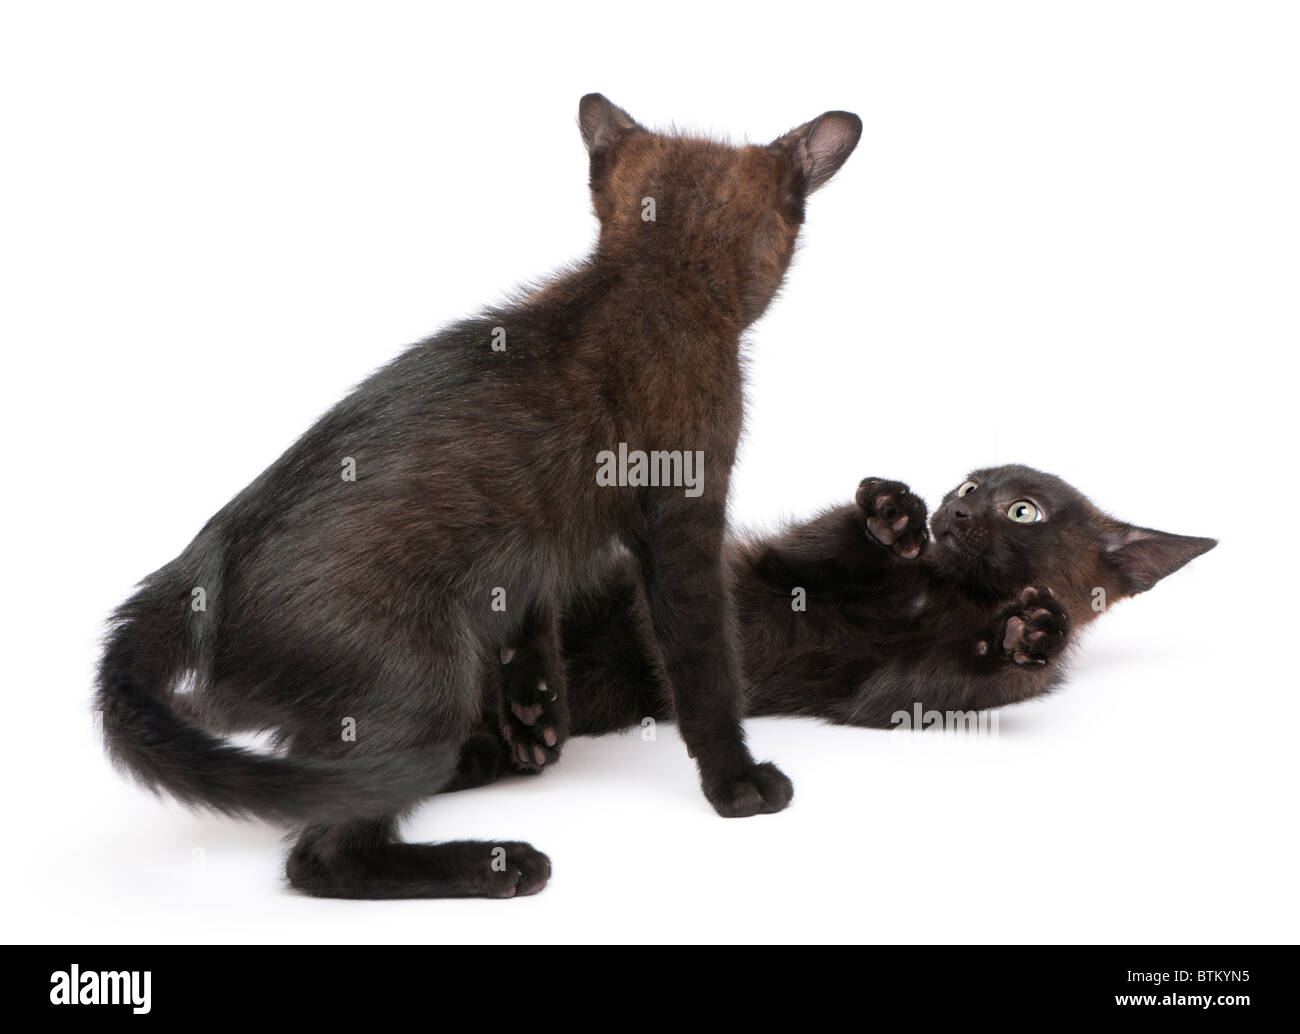 Two black kittens playing together in front of white background Stock Photo